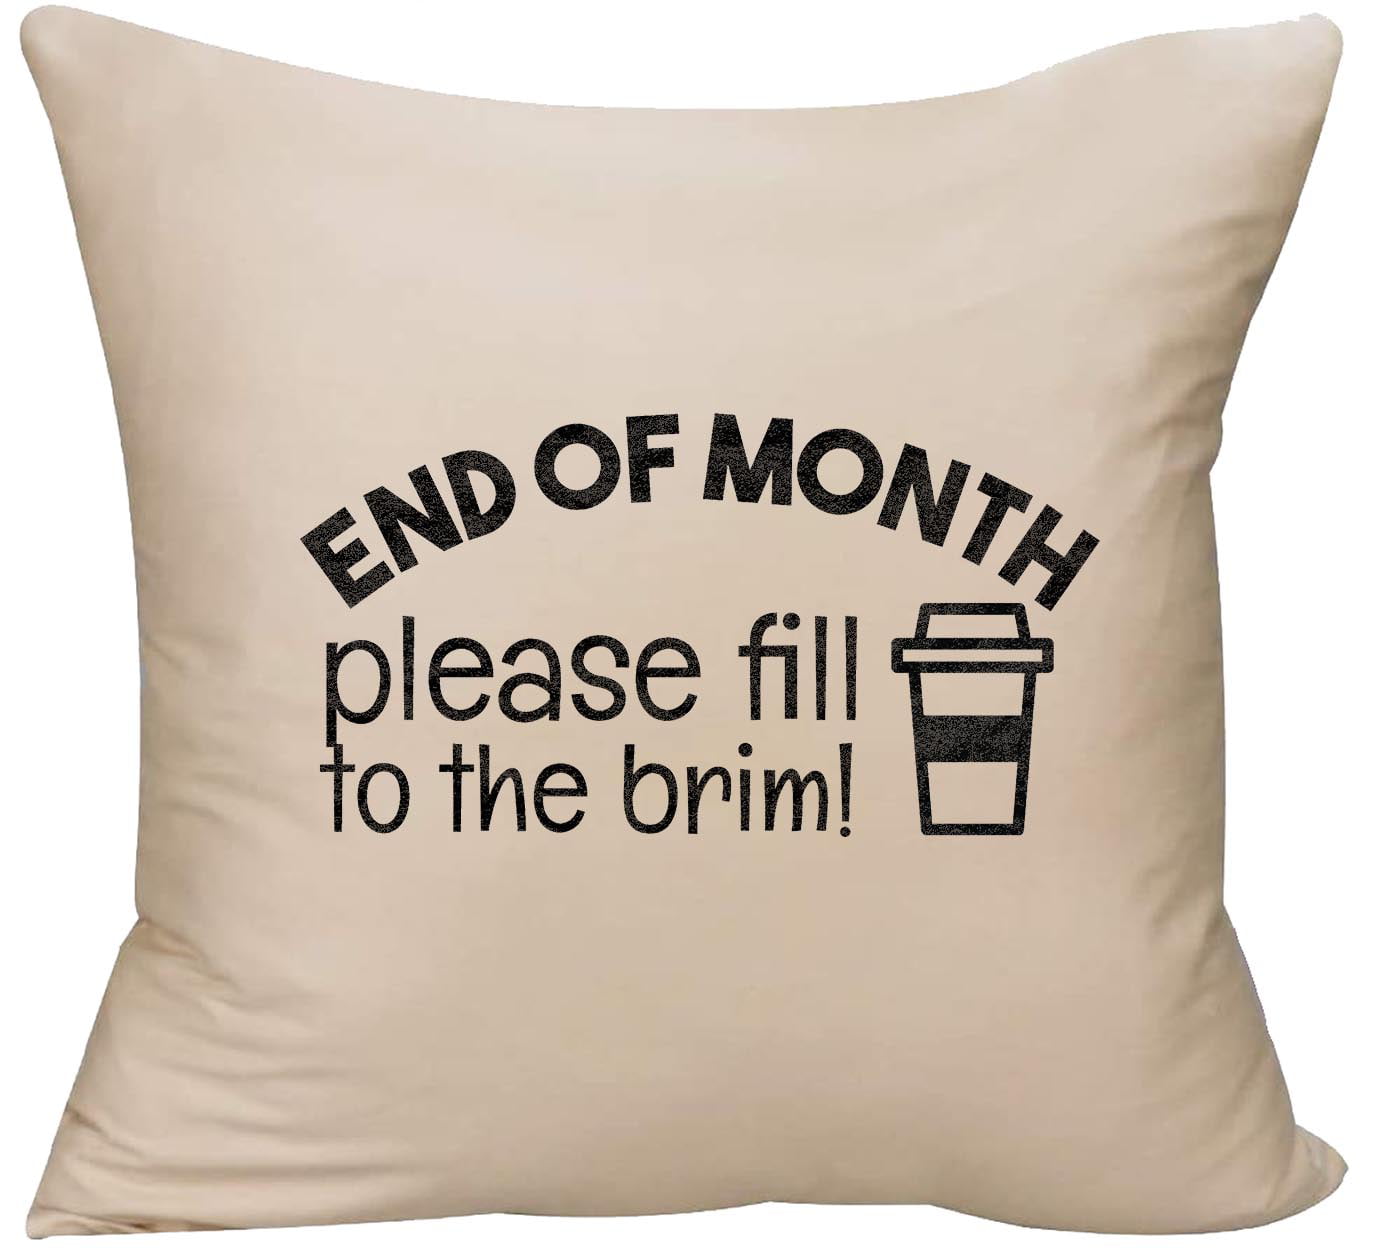 End of month please fill to the brim! coffee funny stressed tired  Decorative Throw Pillow cover 18 x 18 Beige Funny Gift 